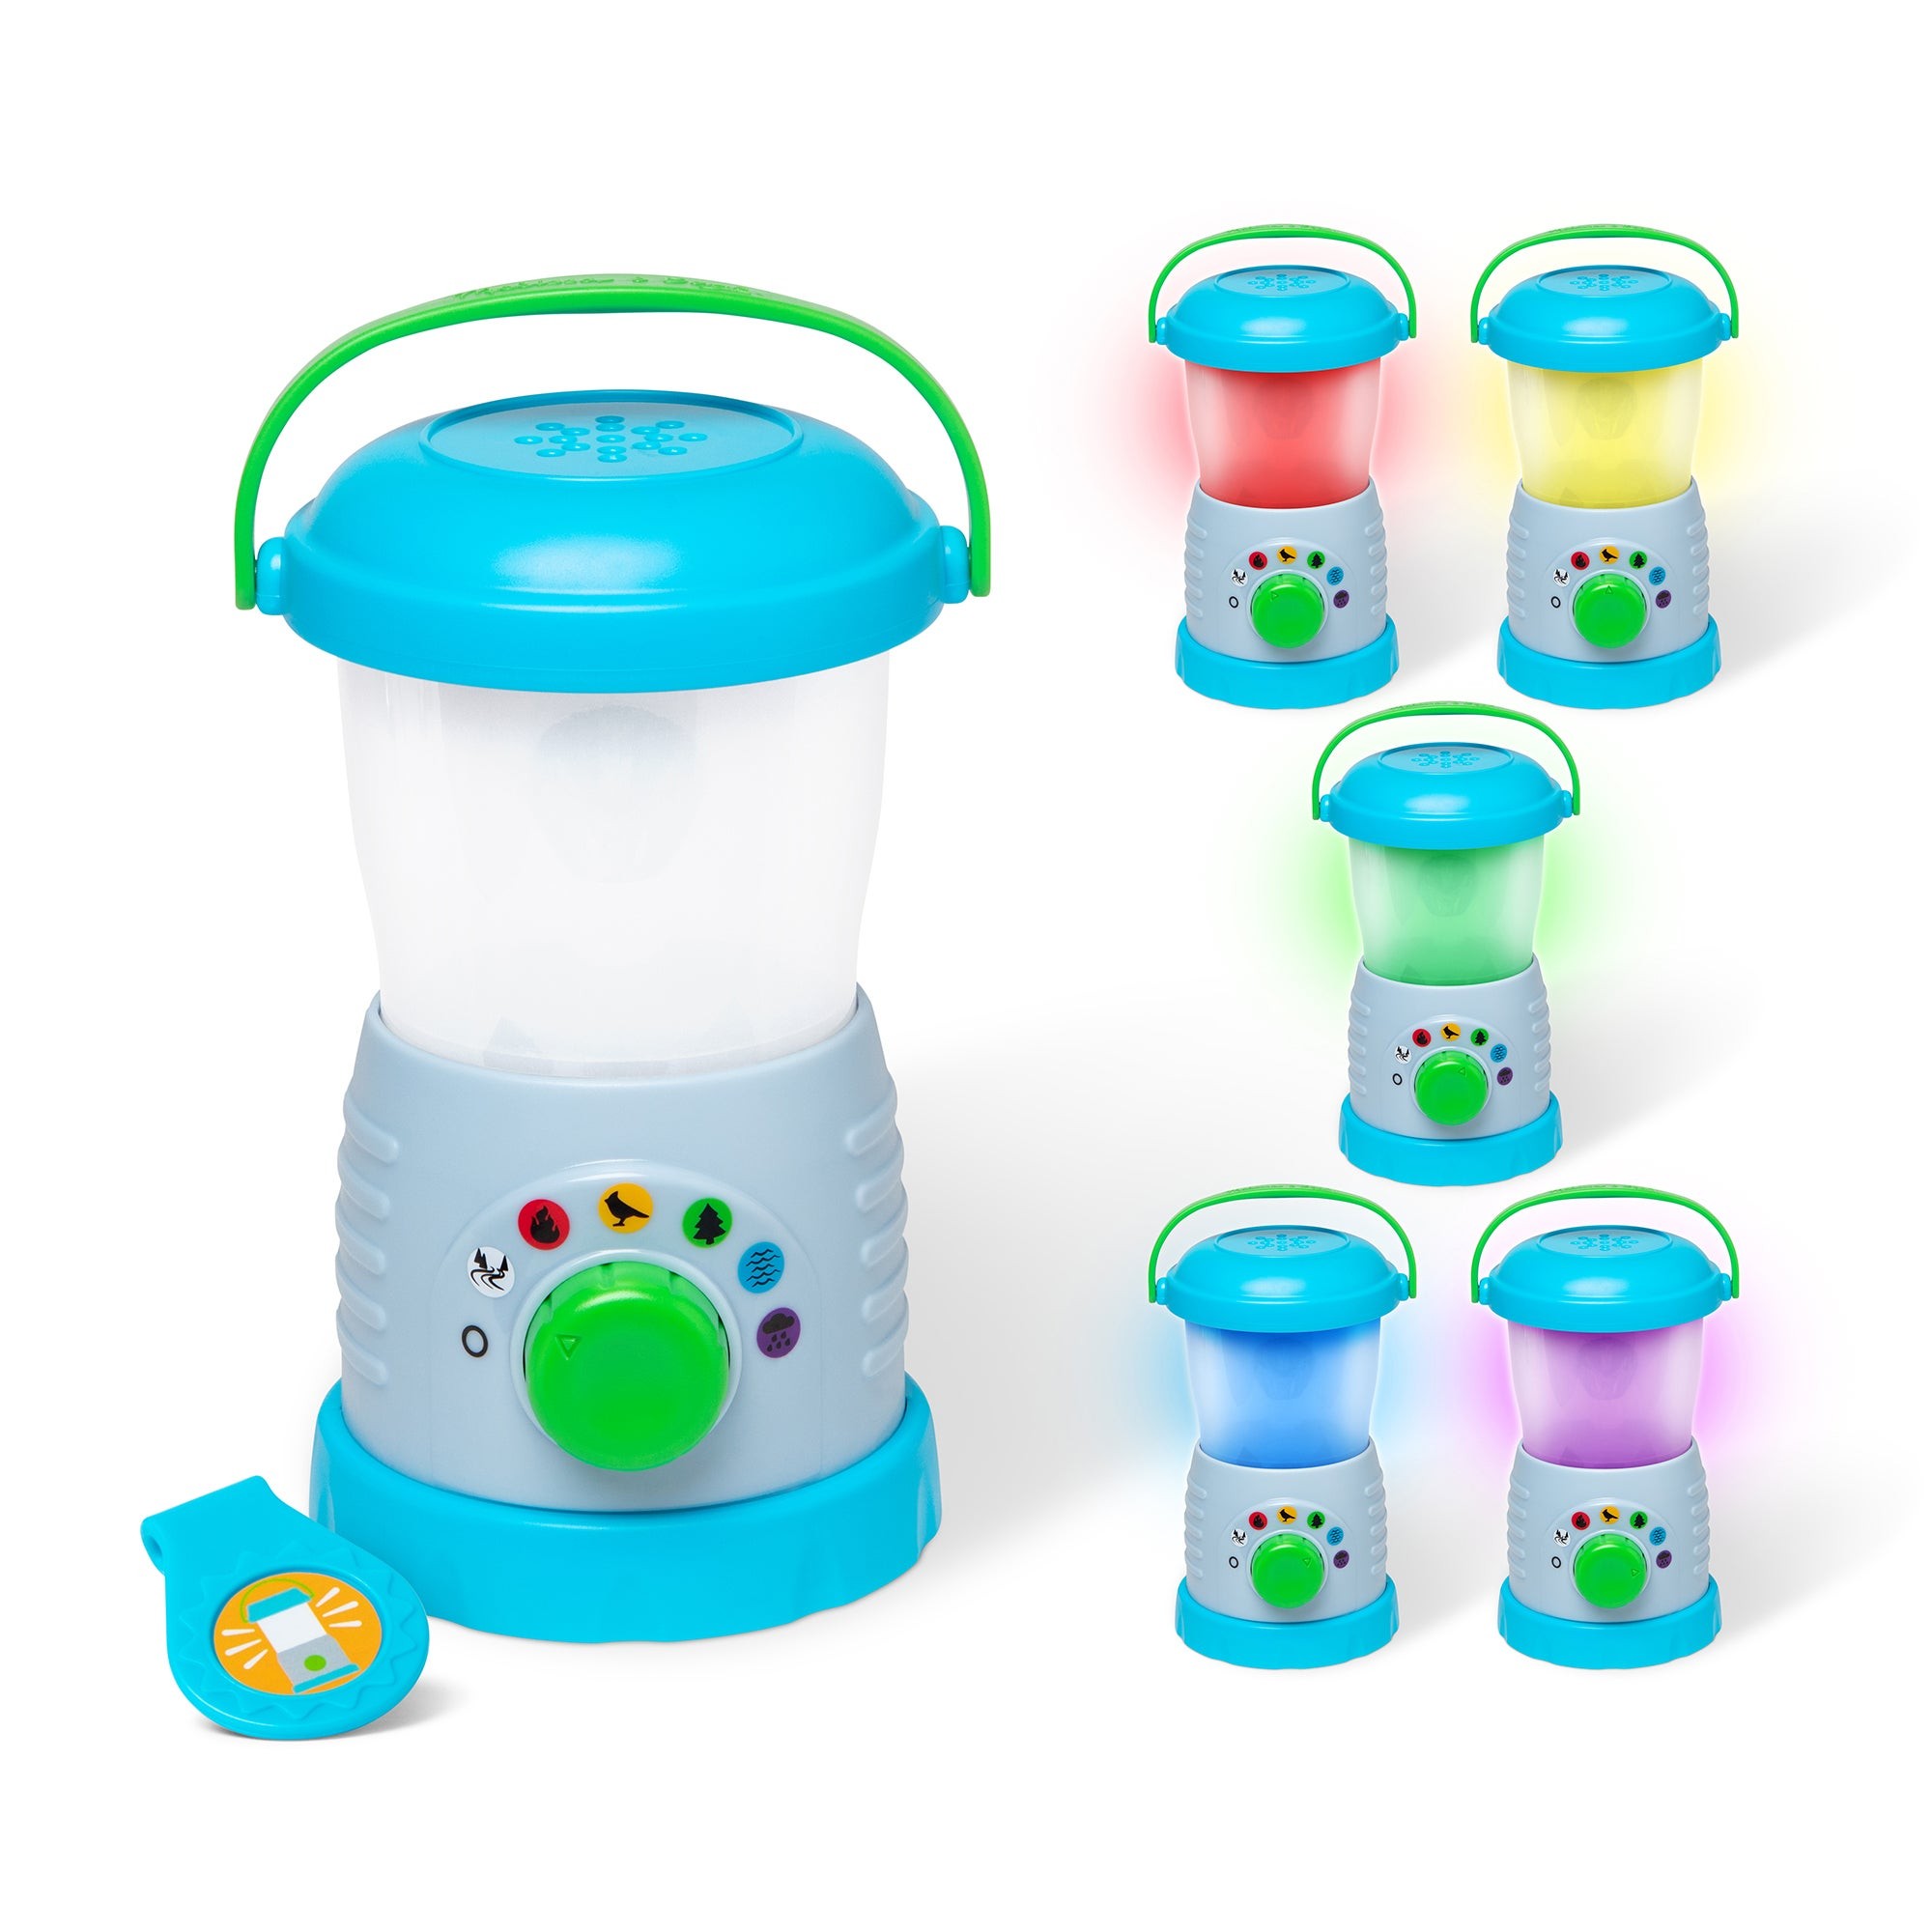 Let's Explore Light & Lantern Play Set, Ages 3+ Years